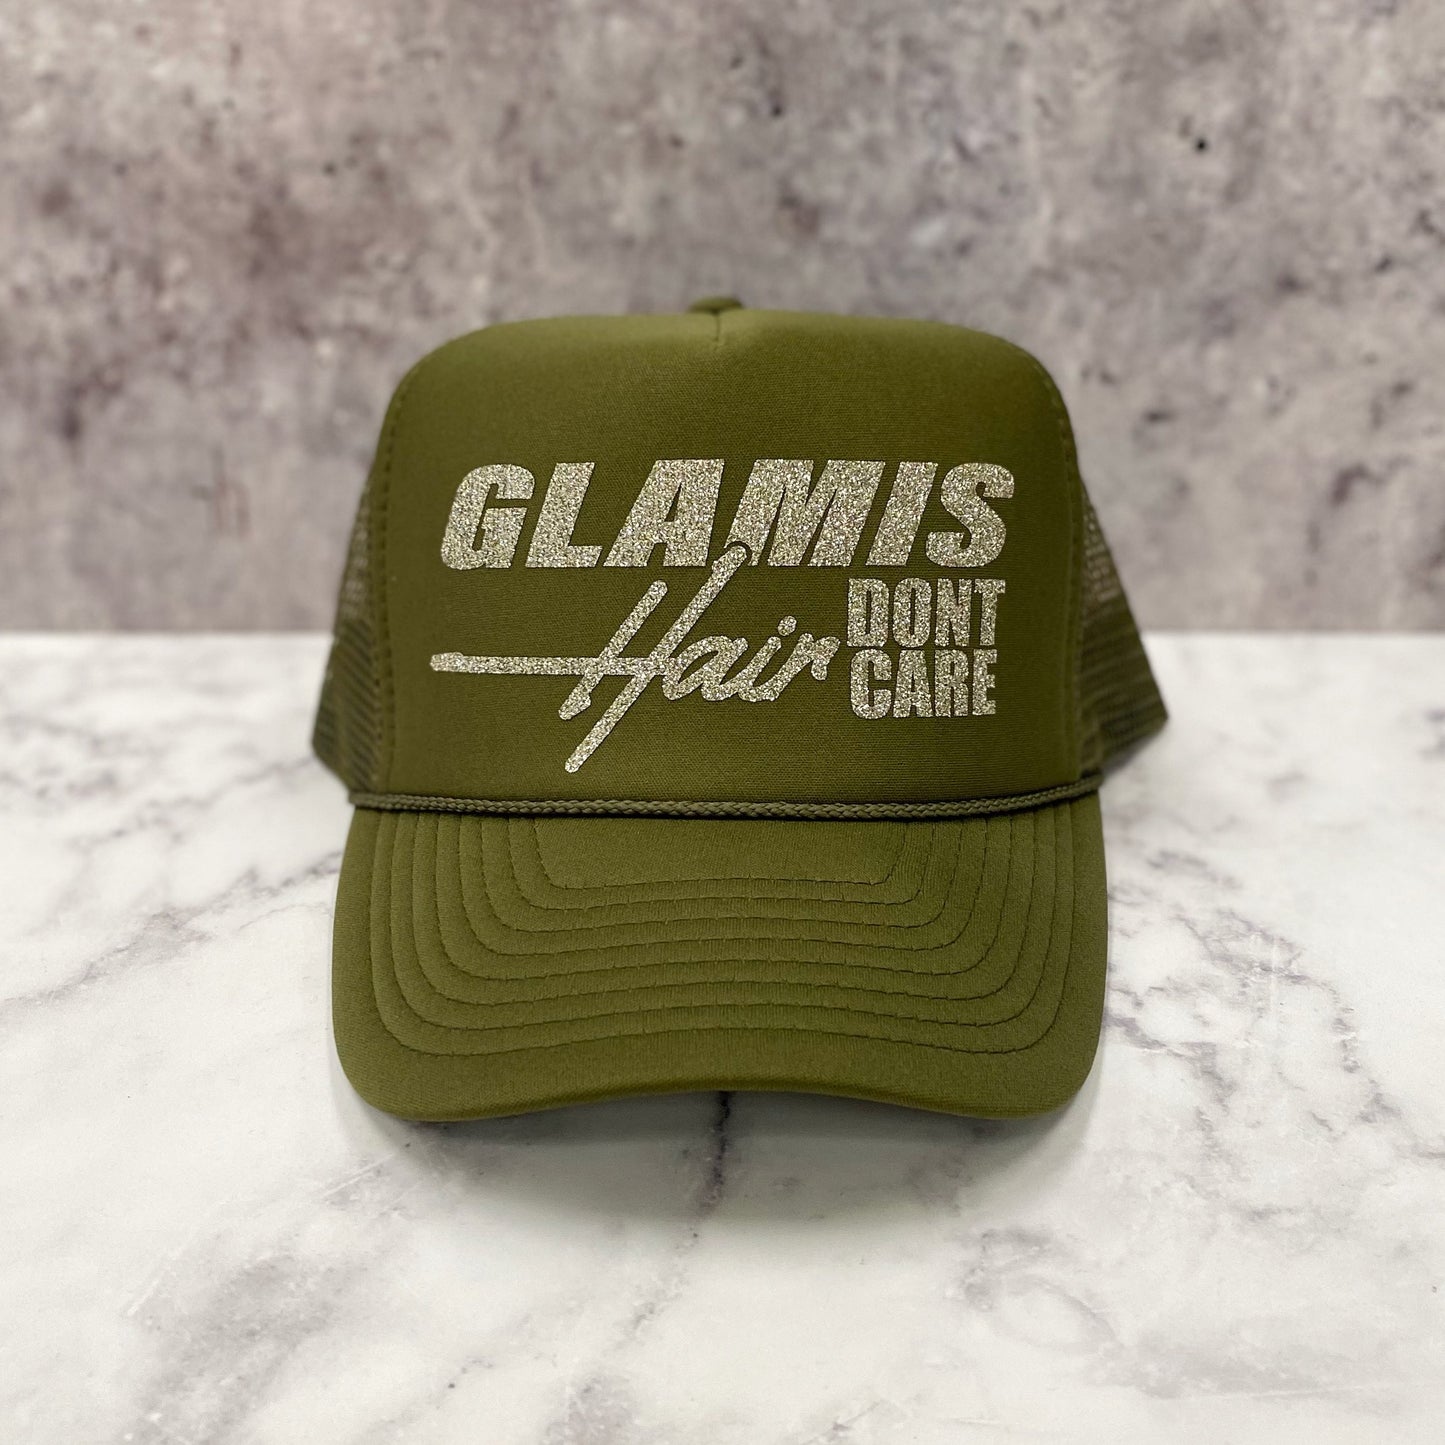 Glamis Hair Dont Care Trucker